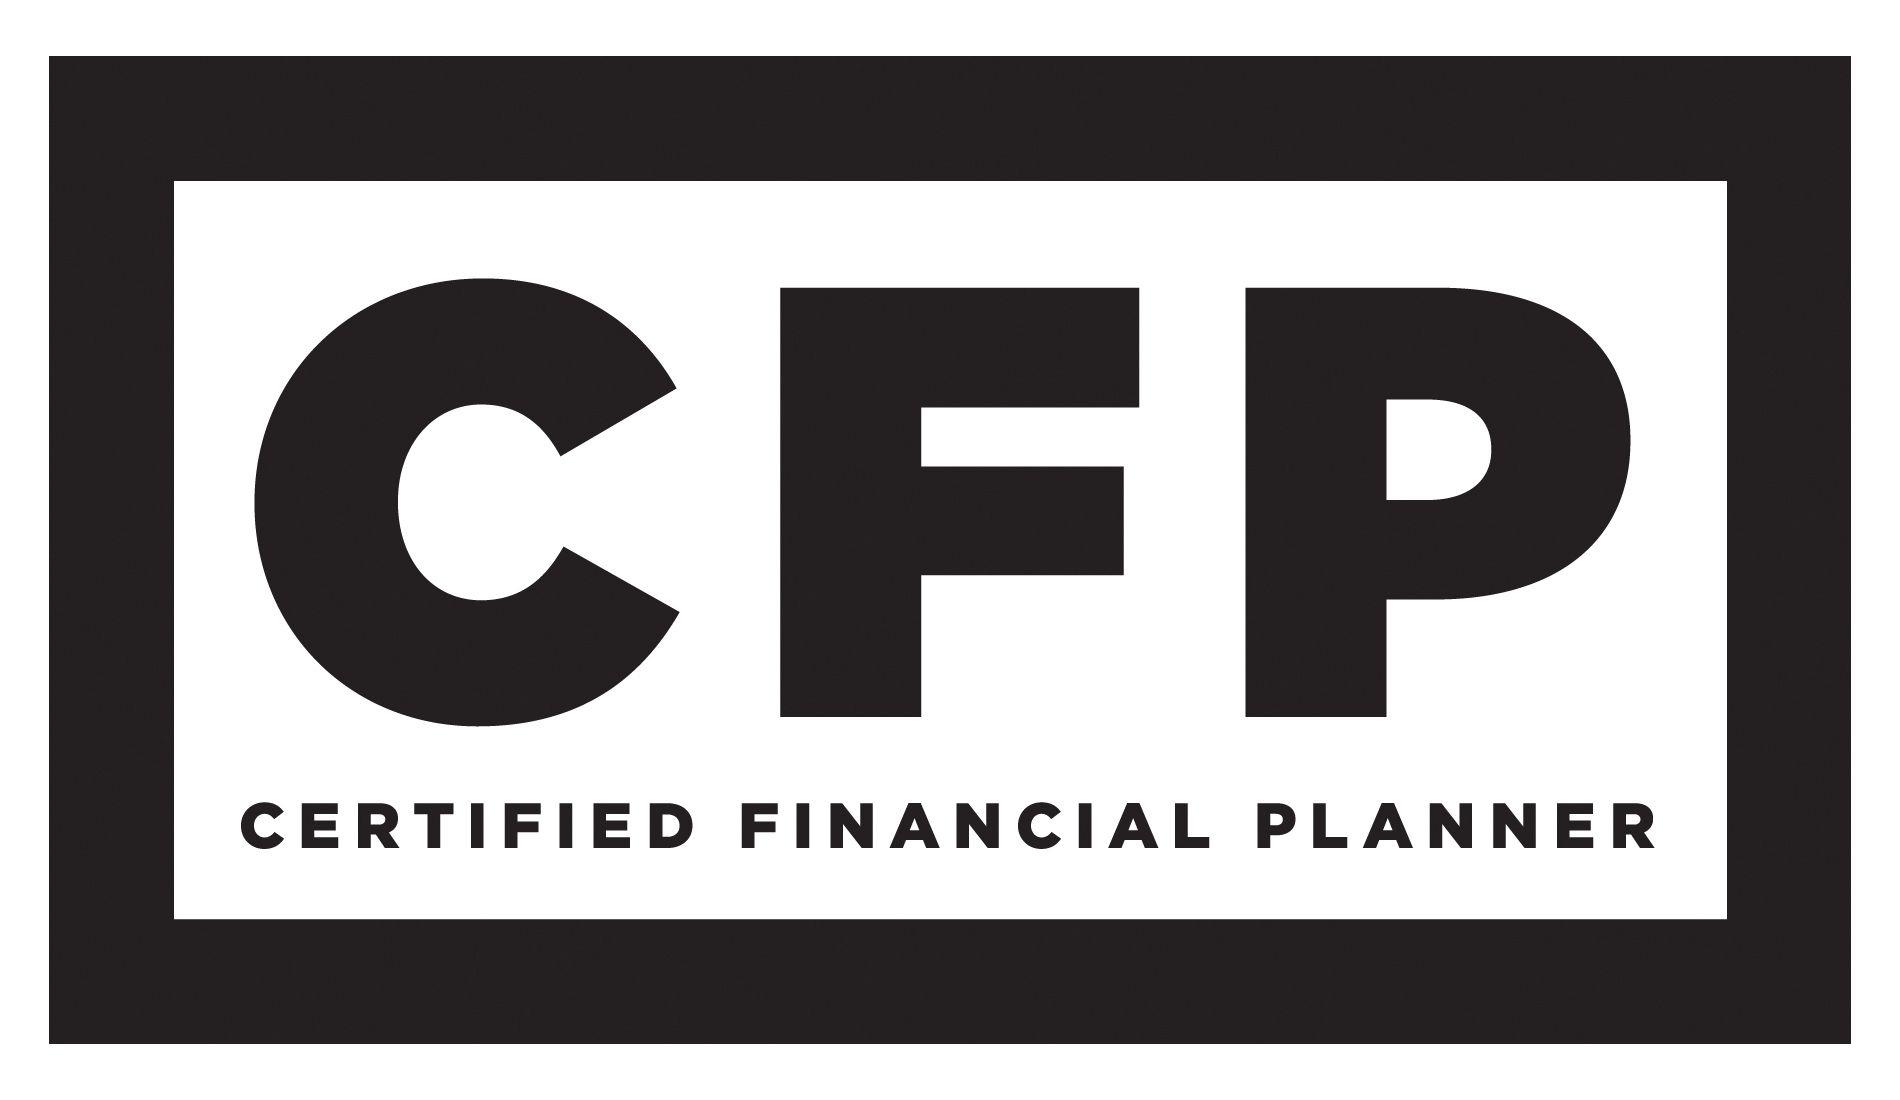 CFP Logo - Meaning Certified Financial Planner logo and symbol | history and ...